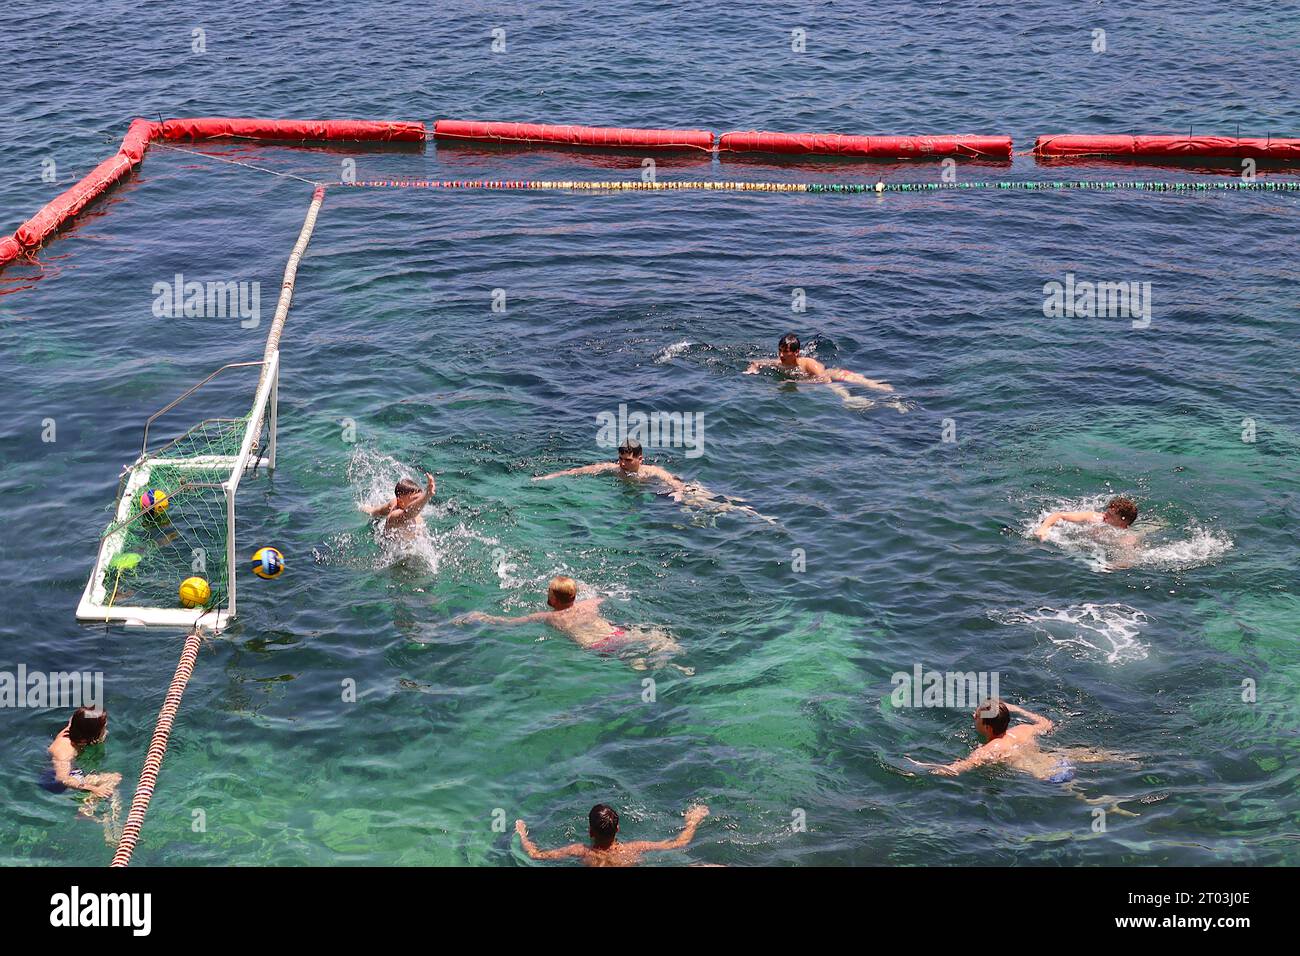 A water polo player scores a goal during a training session in a sectioned off part of the Mediterranean bay at Marsalforn, Gozo, Malta, June 2022. Stock Photo